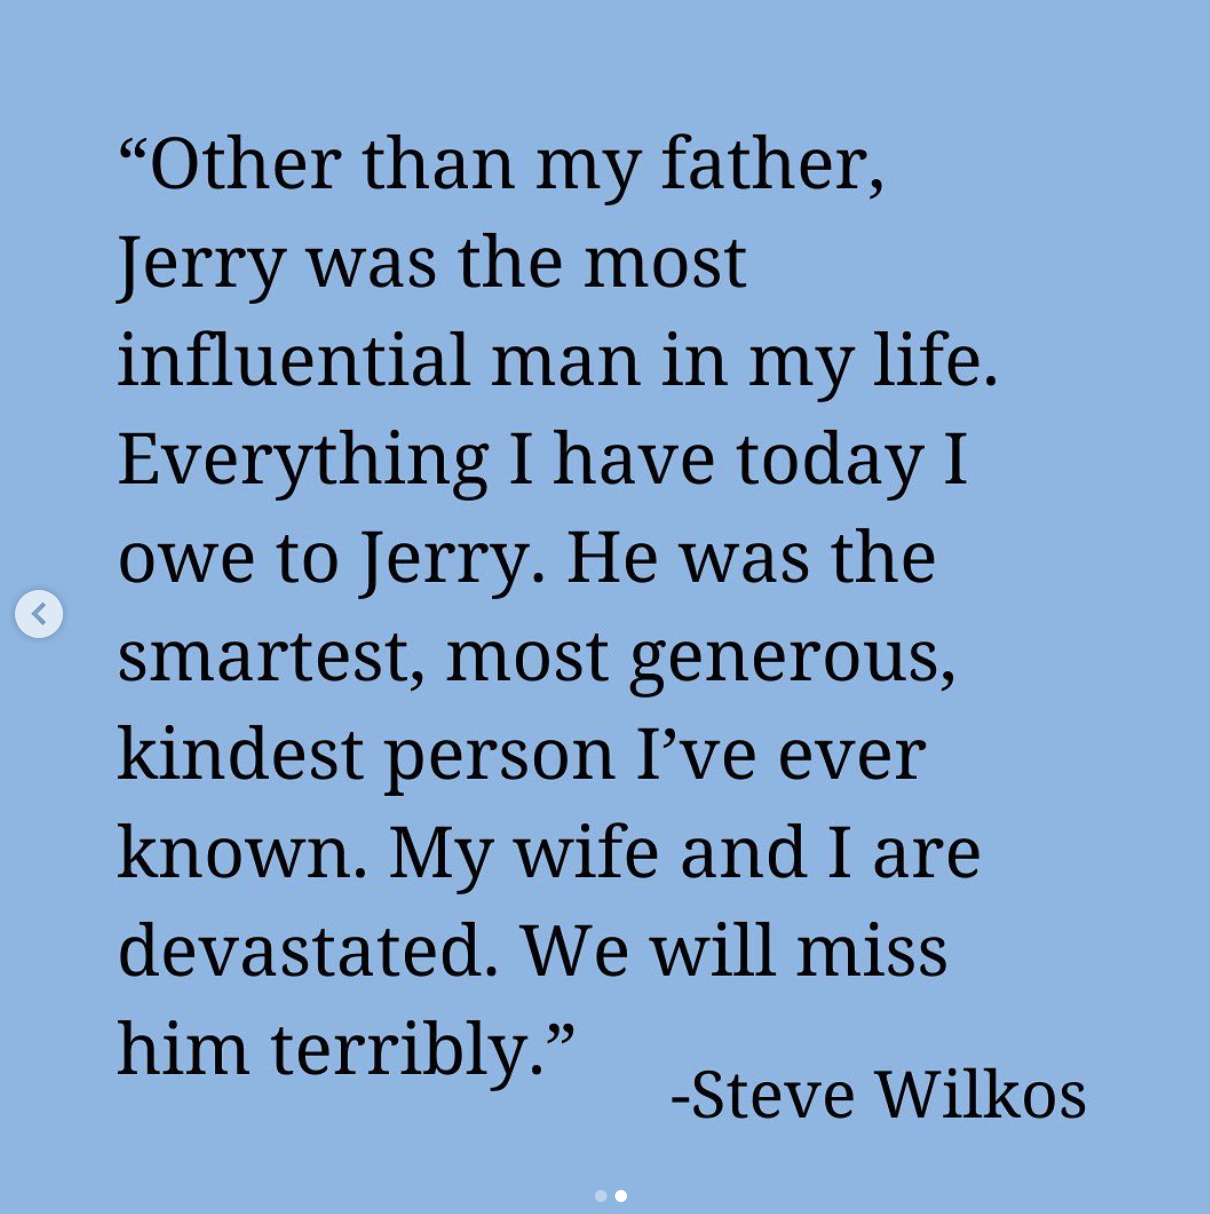 The statement says &quot;other than my father, Jerry was the most influential man in my life. Everything I have today I owe to Jerry. He was the smartest, most generous, kindest person I&#x27;ve ever known. My wife and I are devastated, we will miss him terribly&quot;